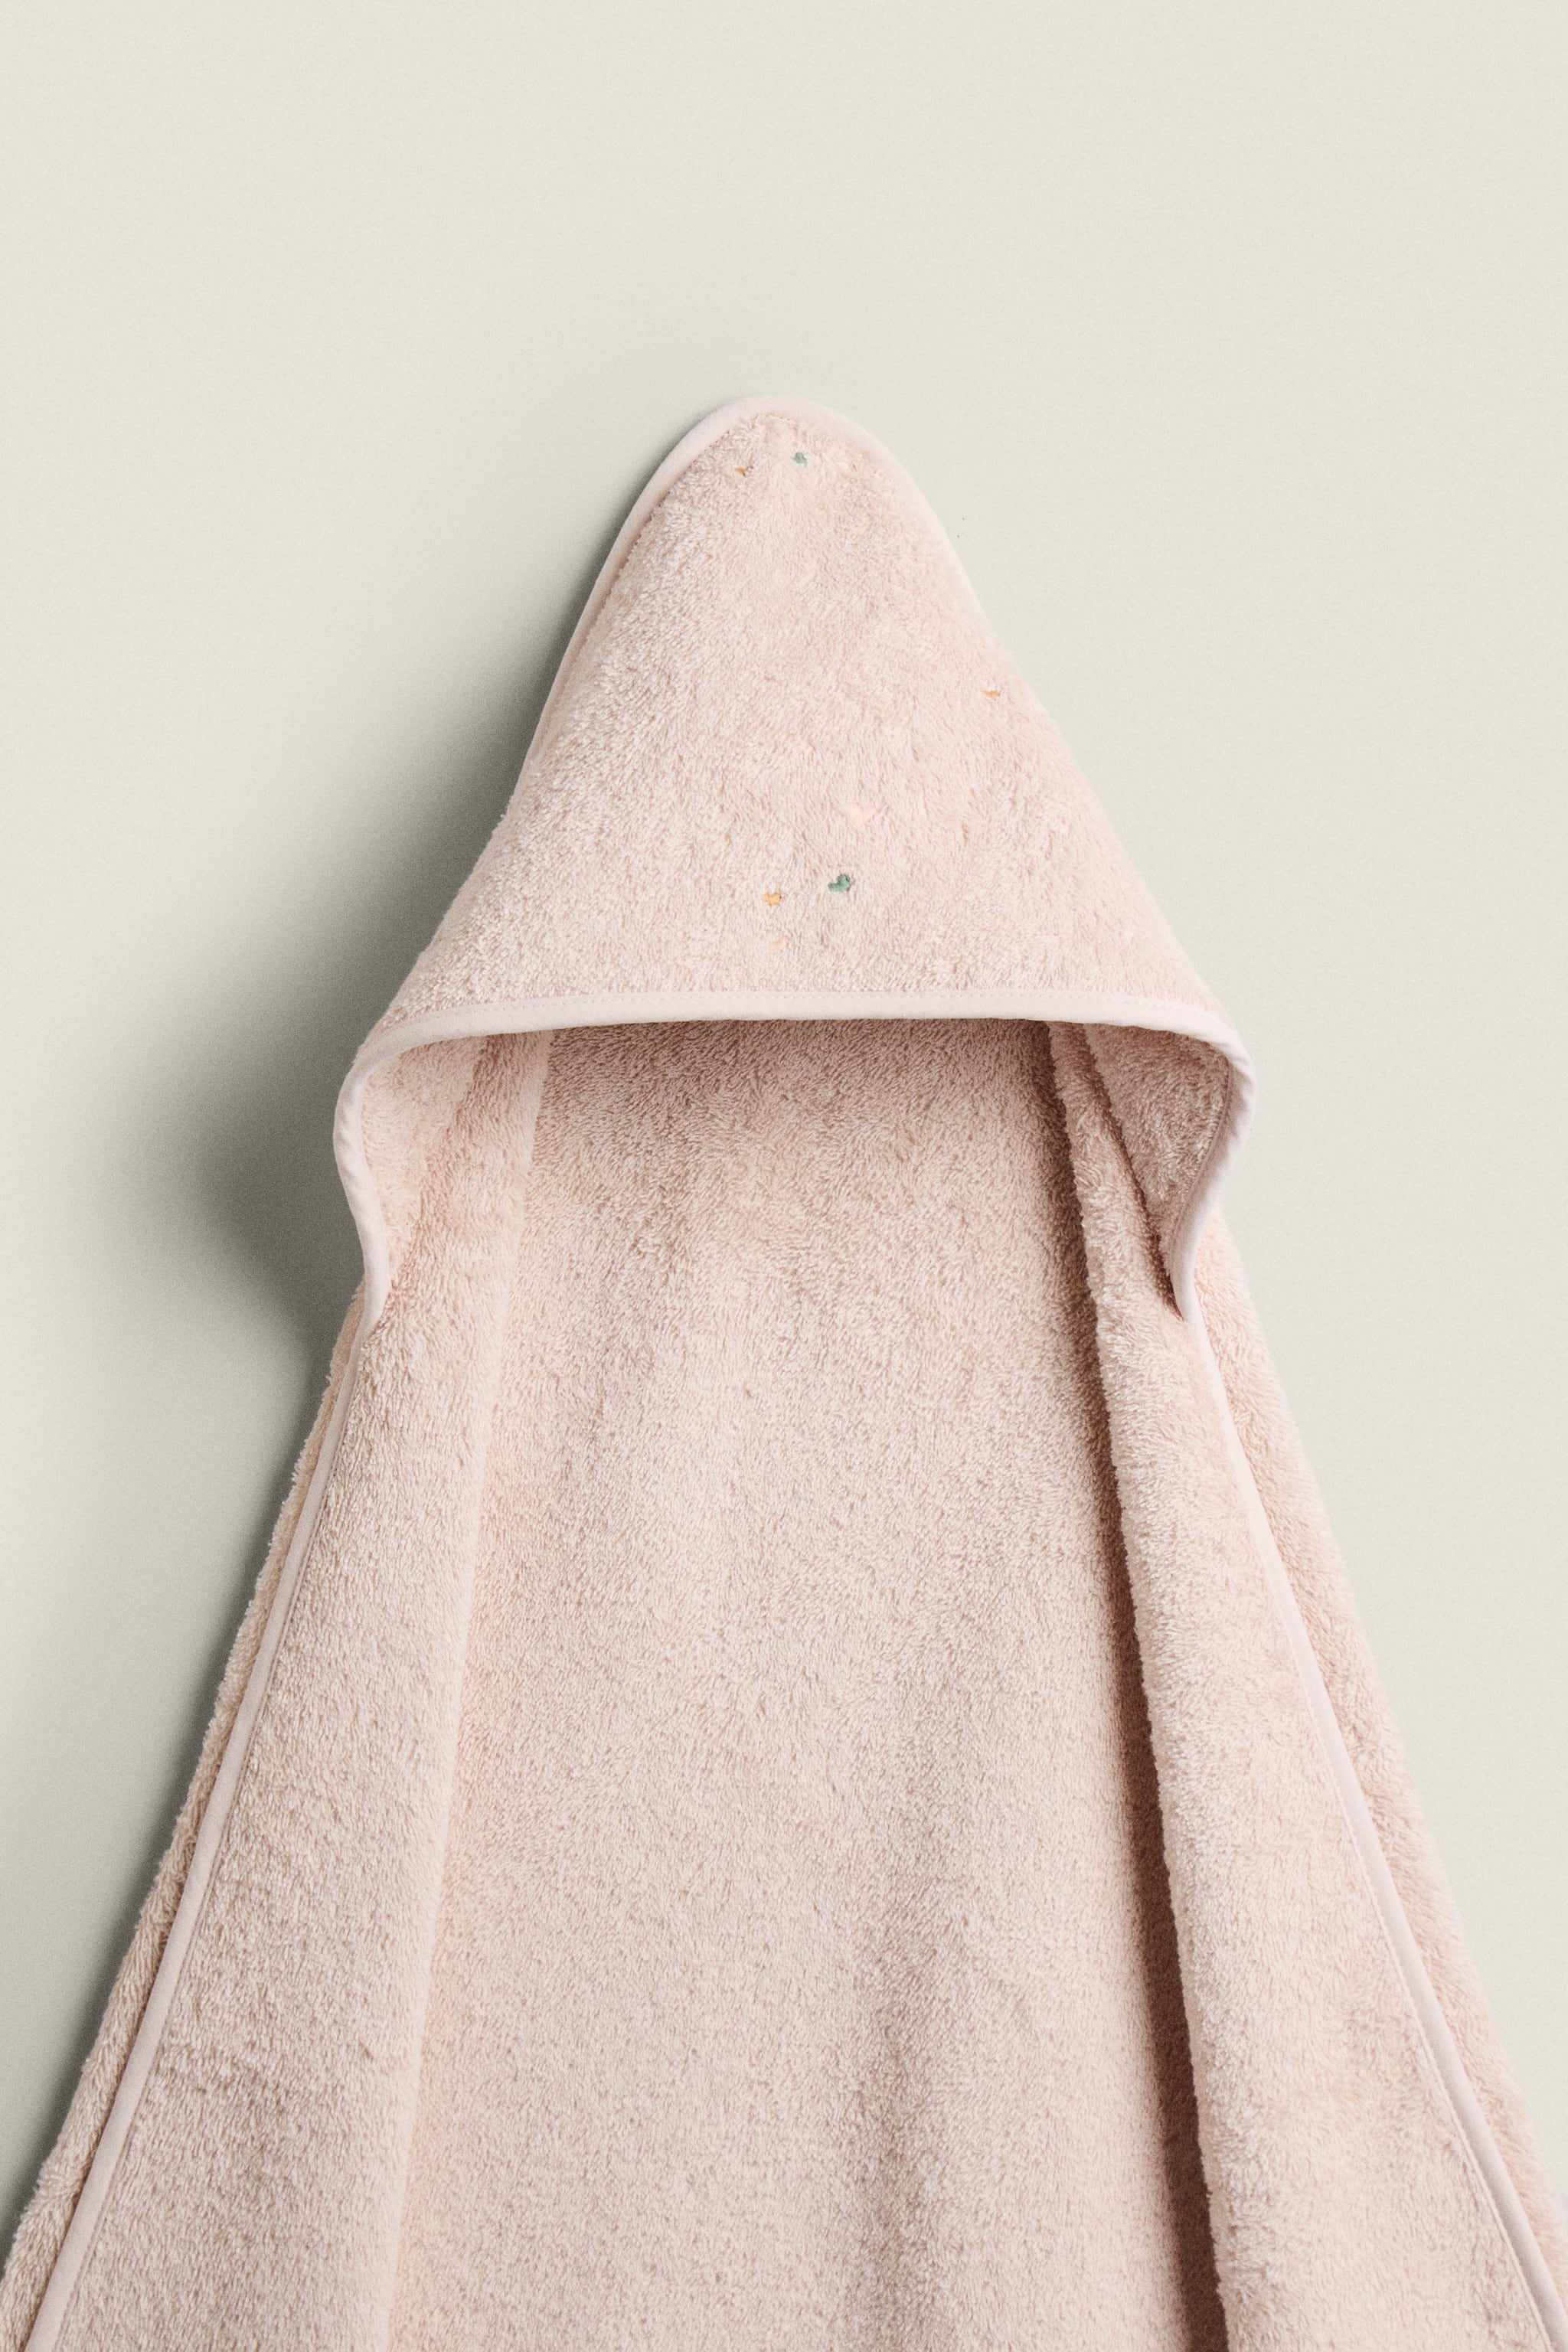 CHILDREN'S HEART HOODED TOWEL WITH TASSELS